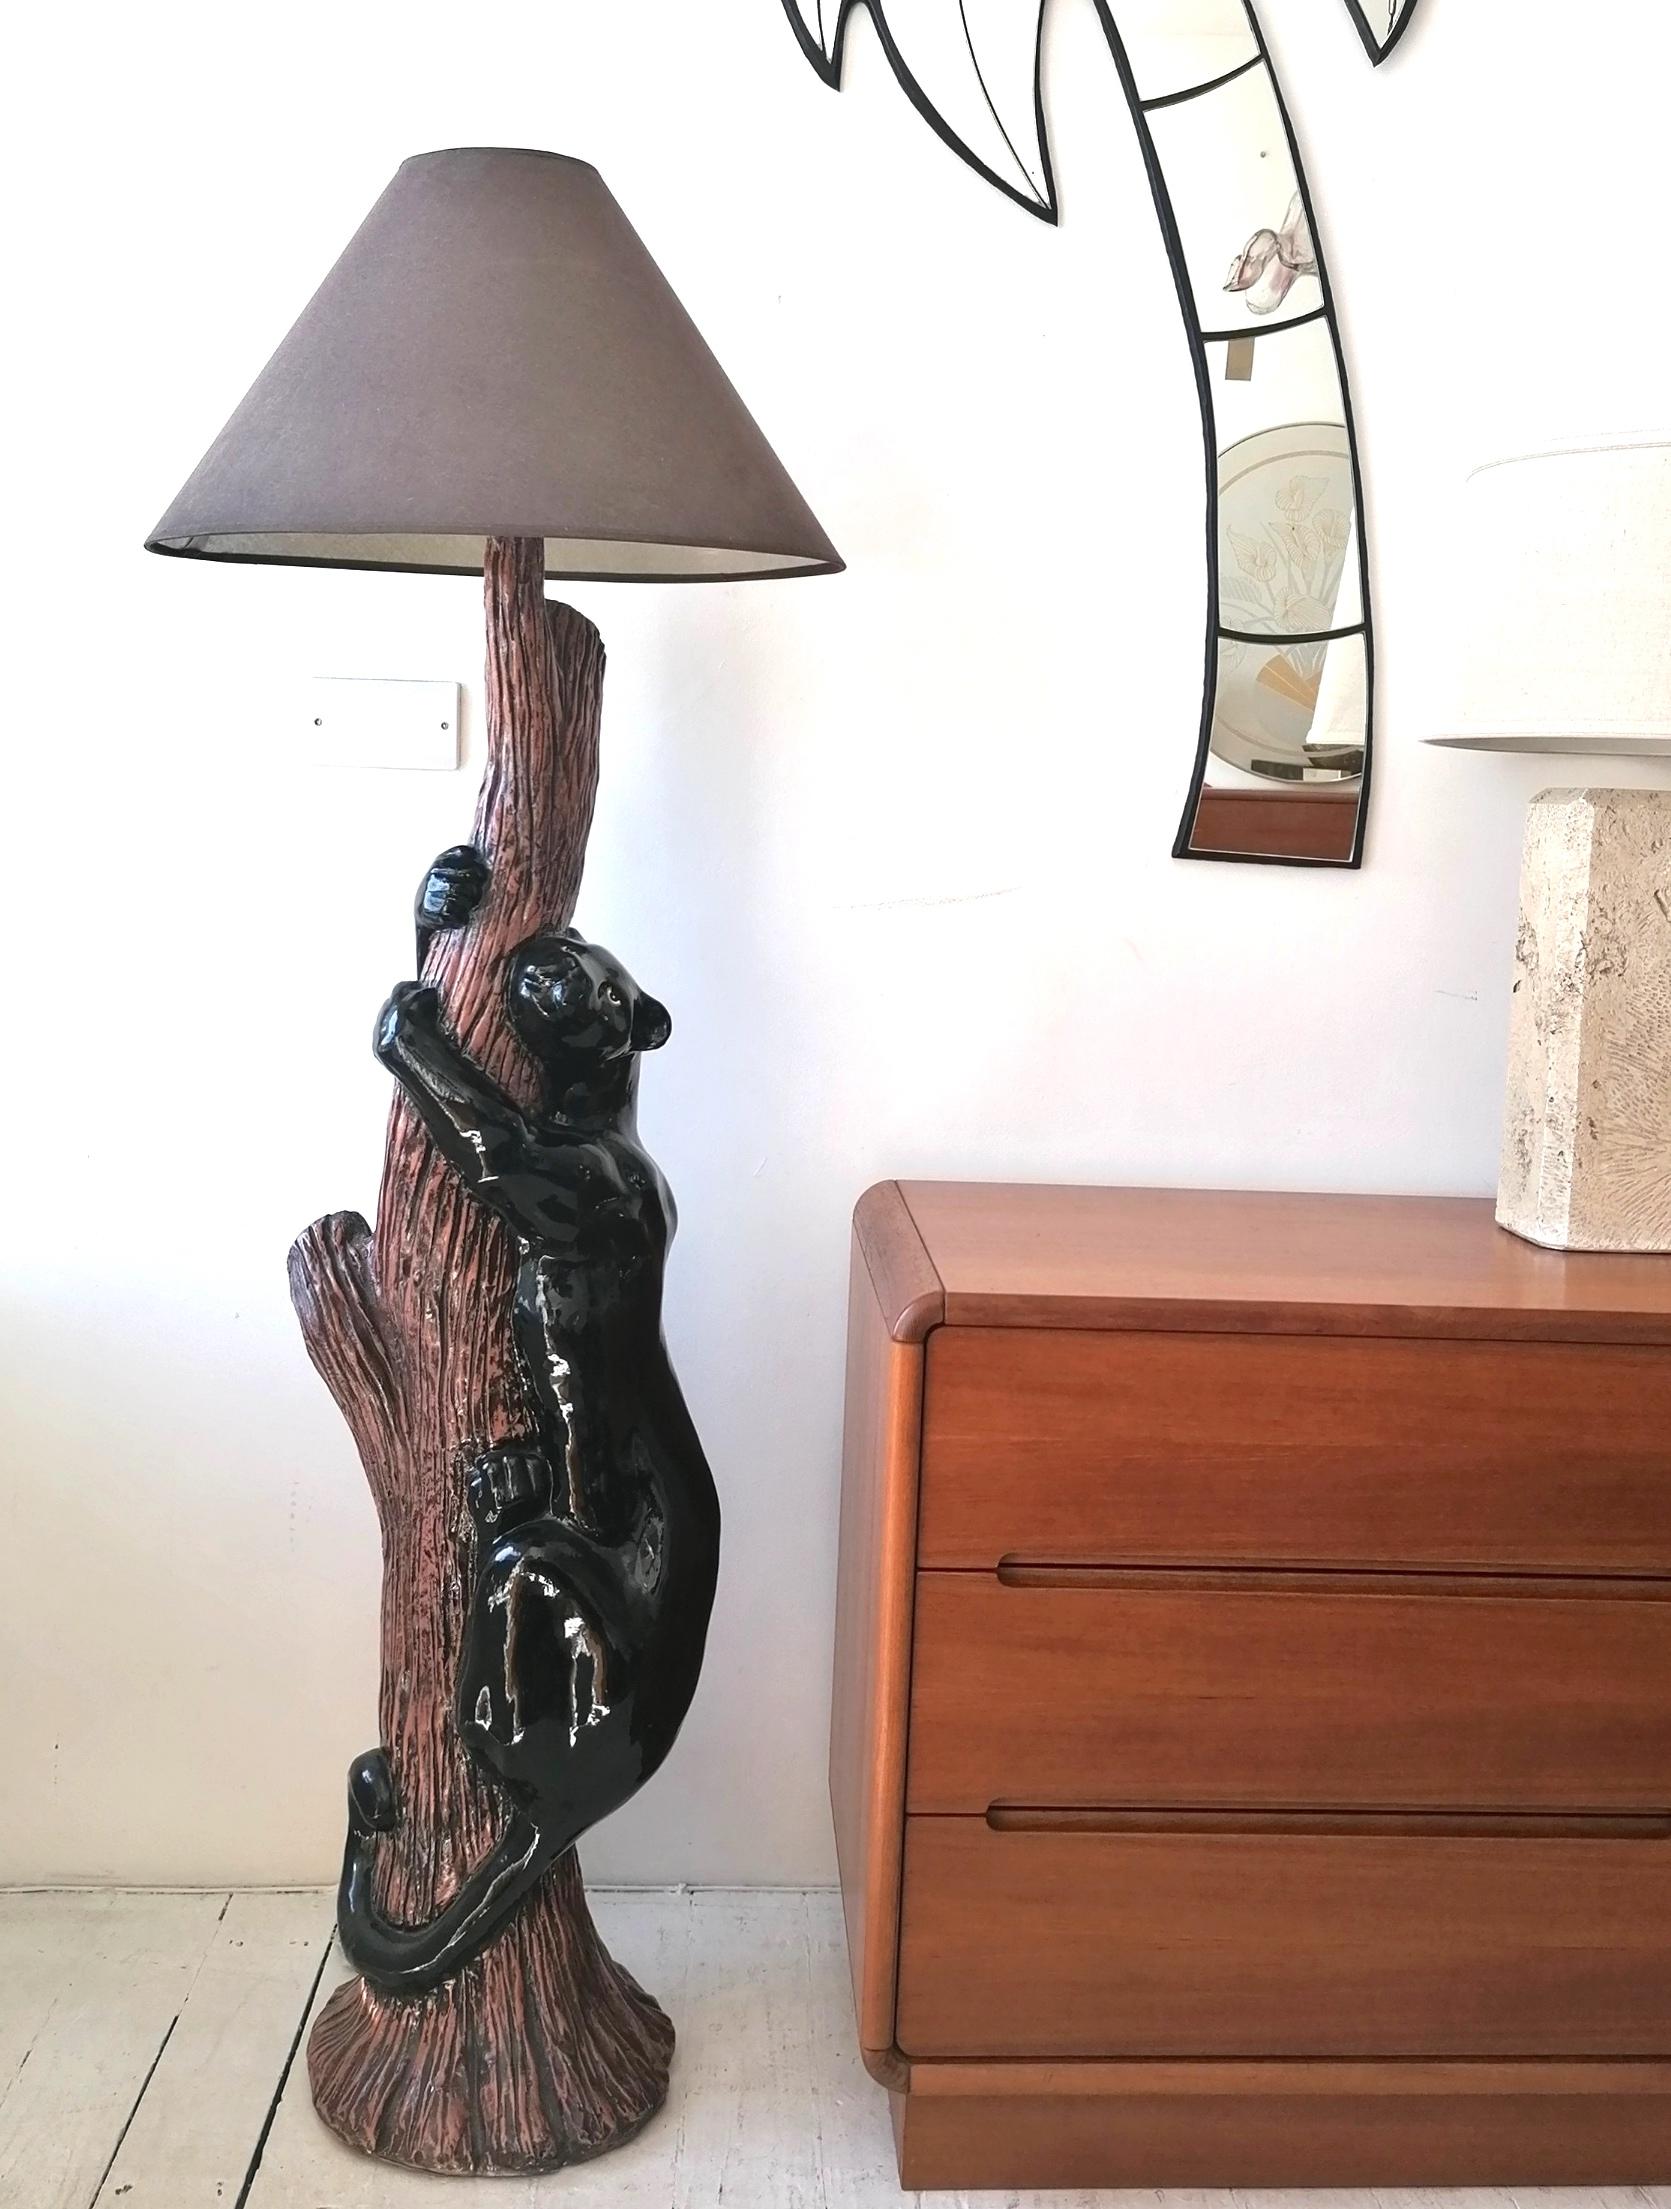 This huge & extravagantly kitsch 80s/90s American ceramic black panther, climbing a tree, floor lamp. Not an easy thing to find (we sourced it in Las Vegas), or bring back to England intact! 
Newly rewired (for UK) with black braided